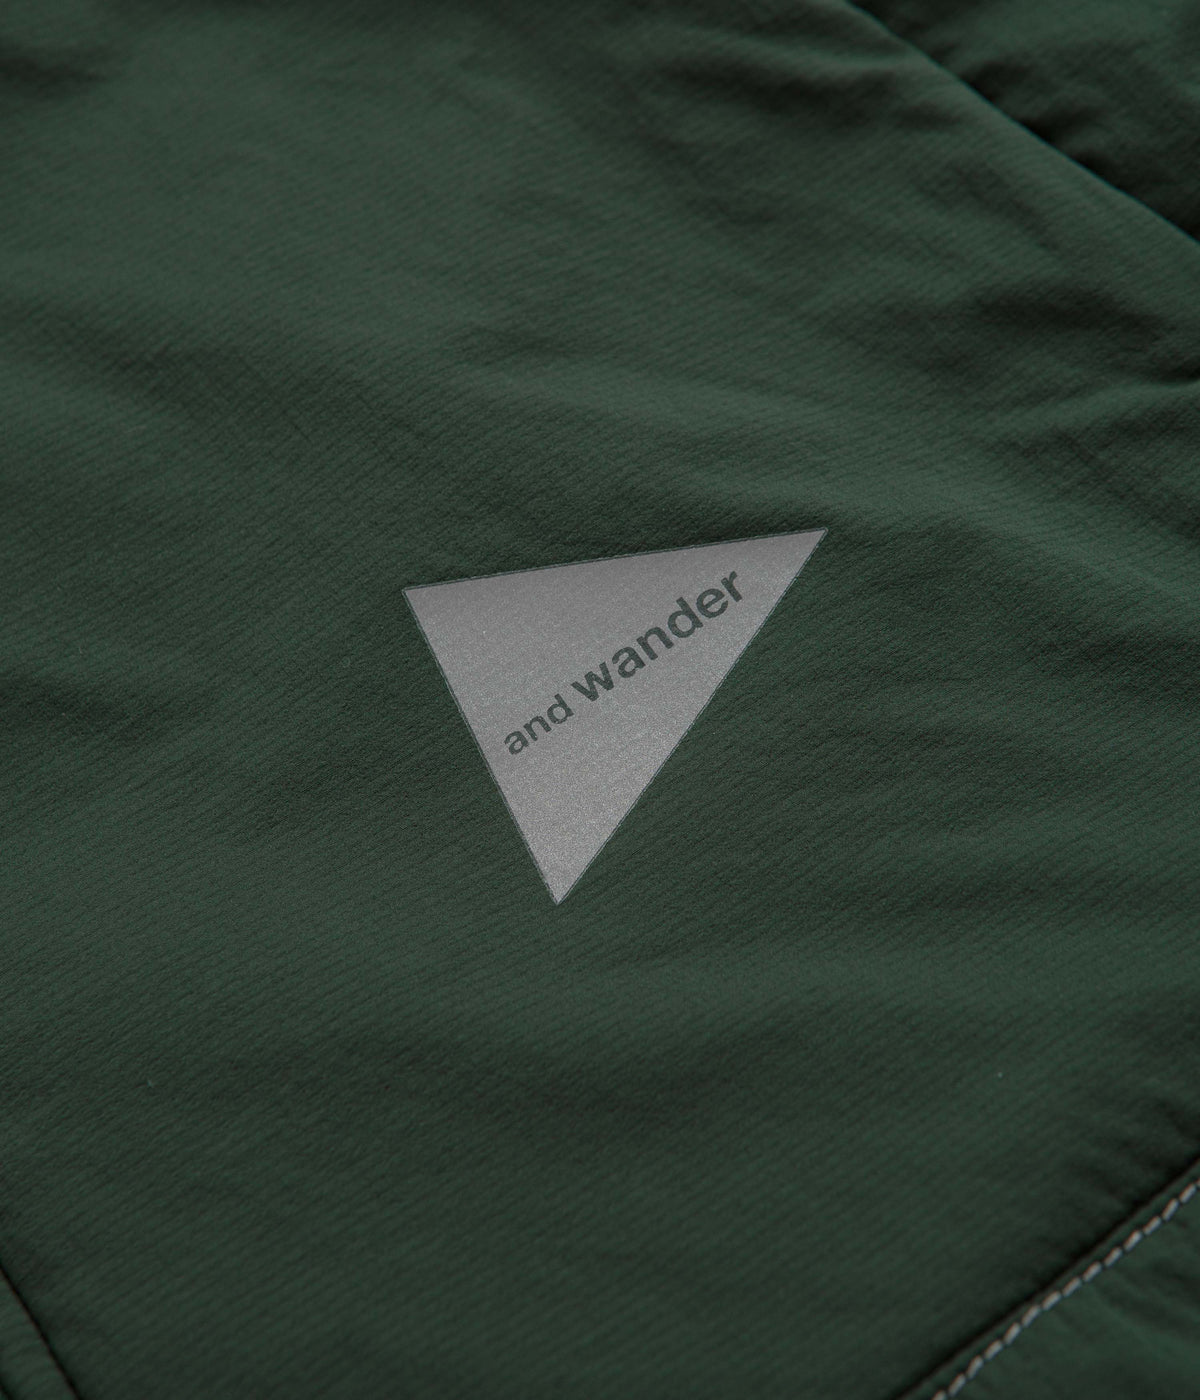 Norse Store  Shipping Worldwide - And Wander Kevlar Hoodie - Green